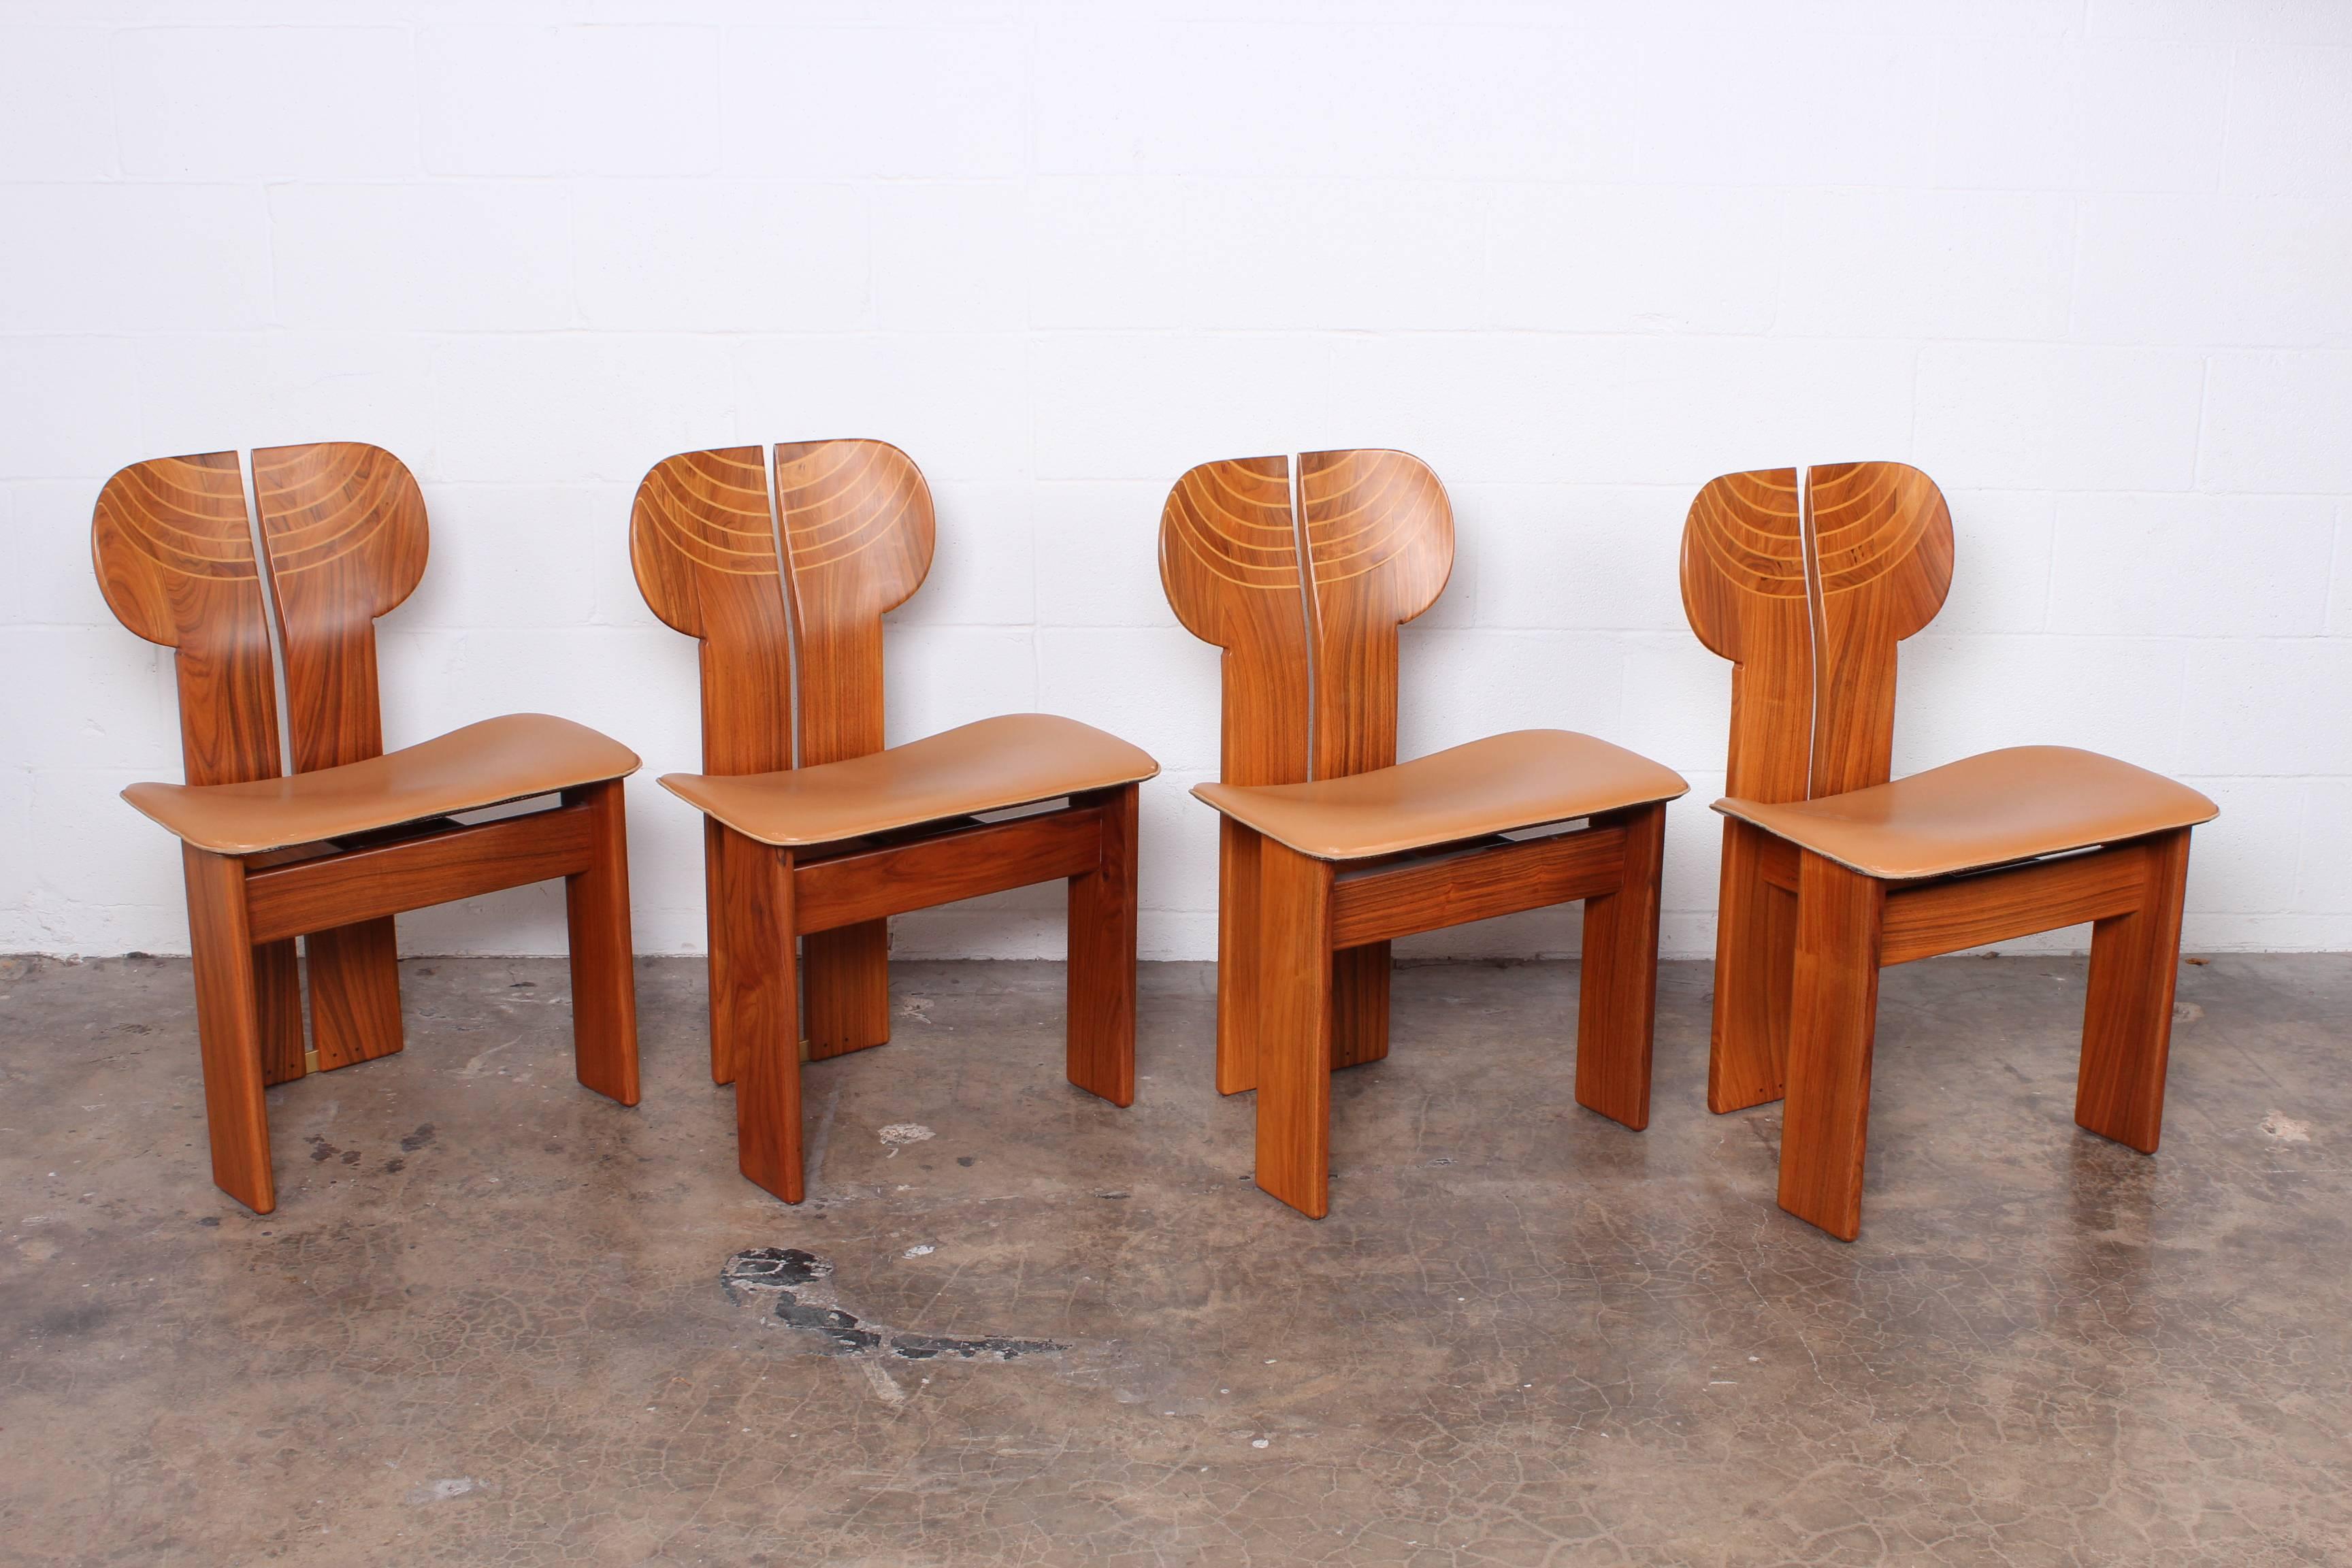 A set of four Africa chairs in pallisander, ebony, leather and brass. Designed by Afra & Tobia Scarpa for Maxalto.